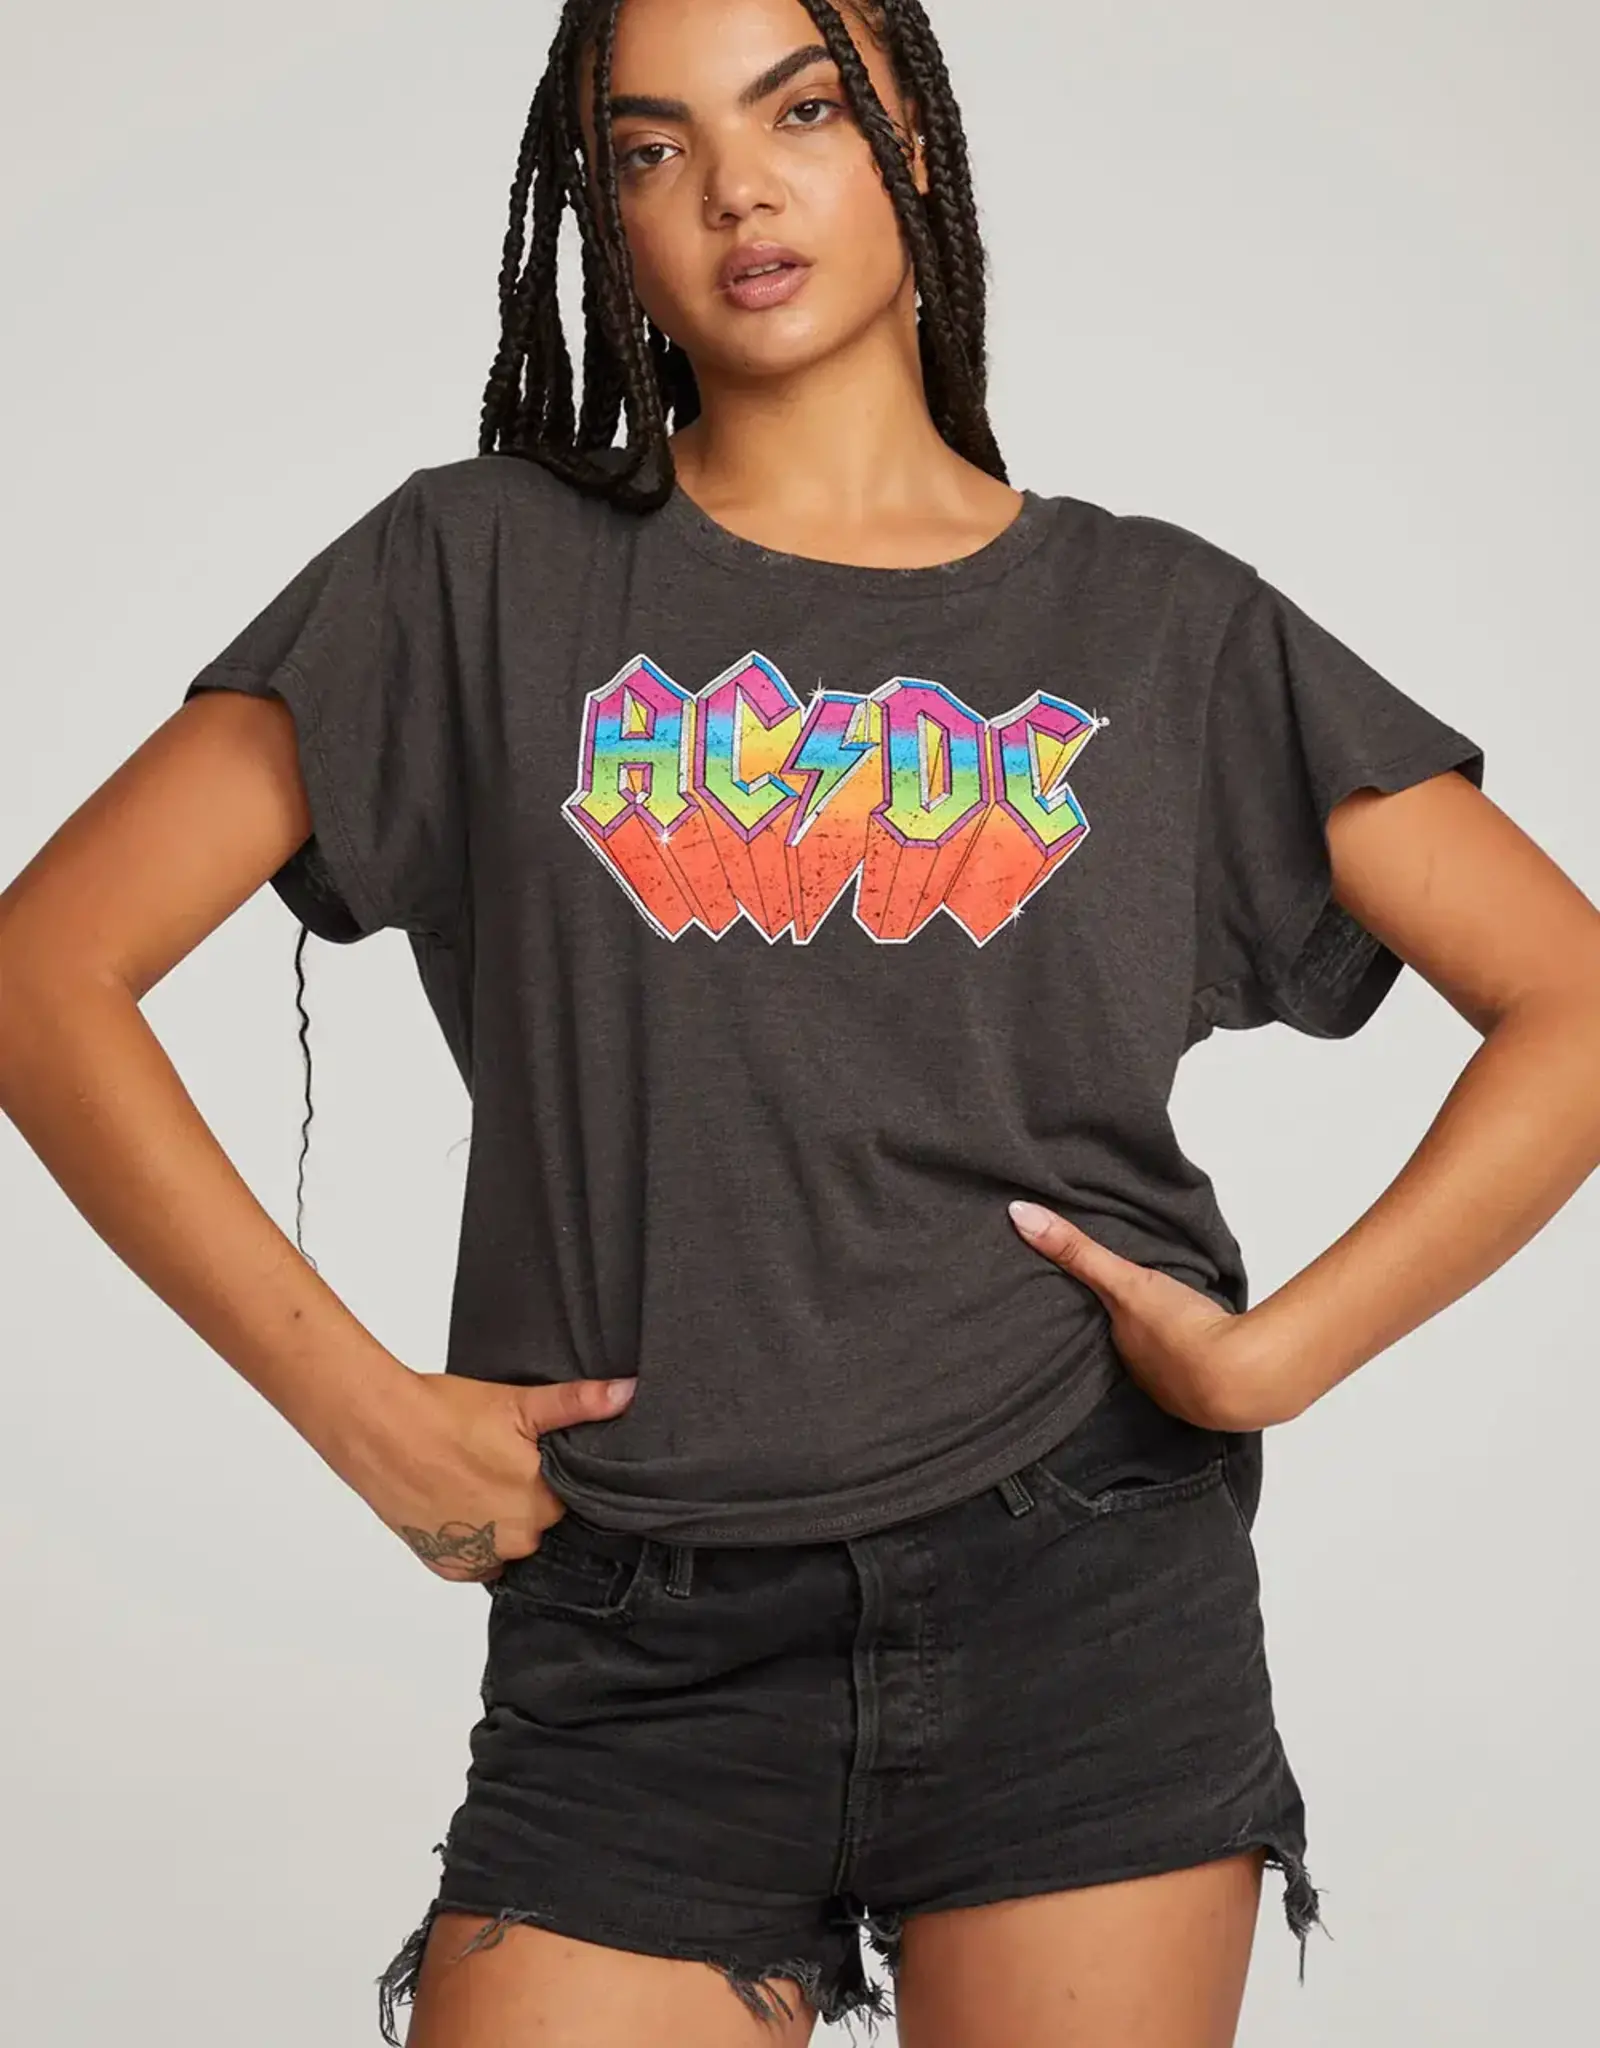 Chaser Chaser AC/DC Classic Tee